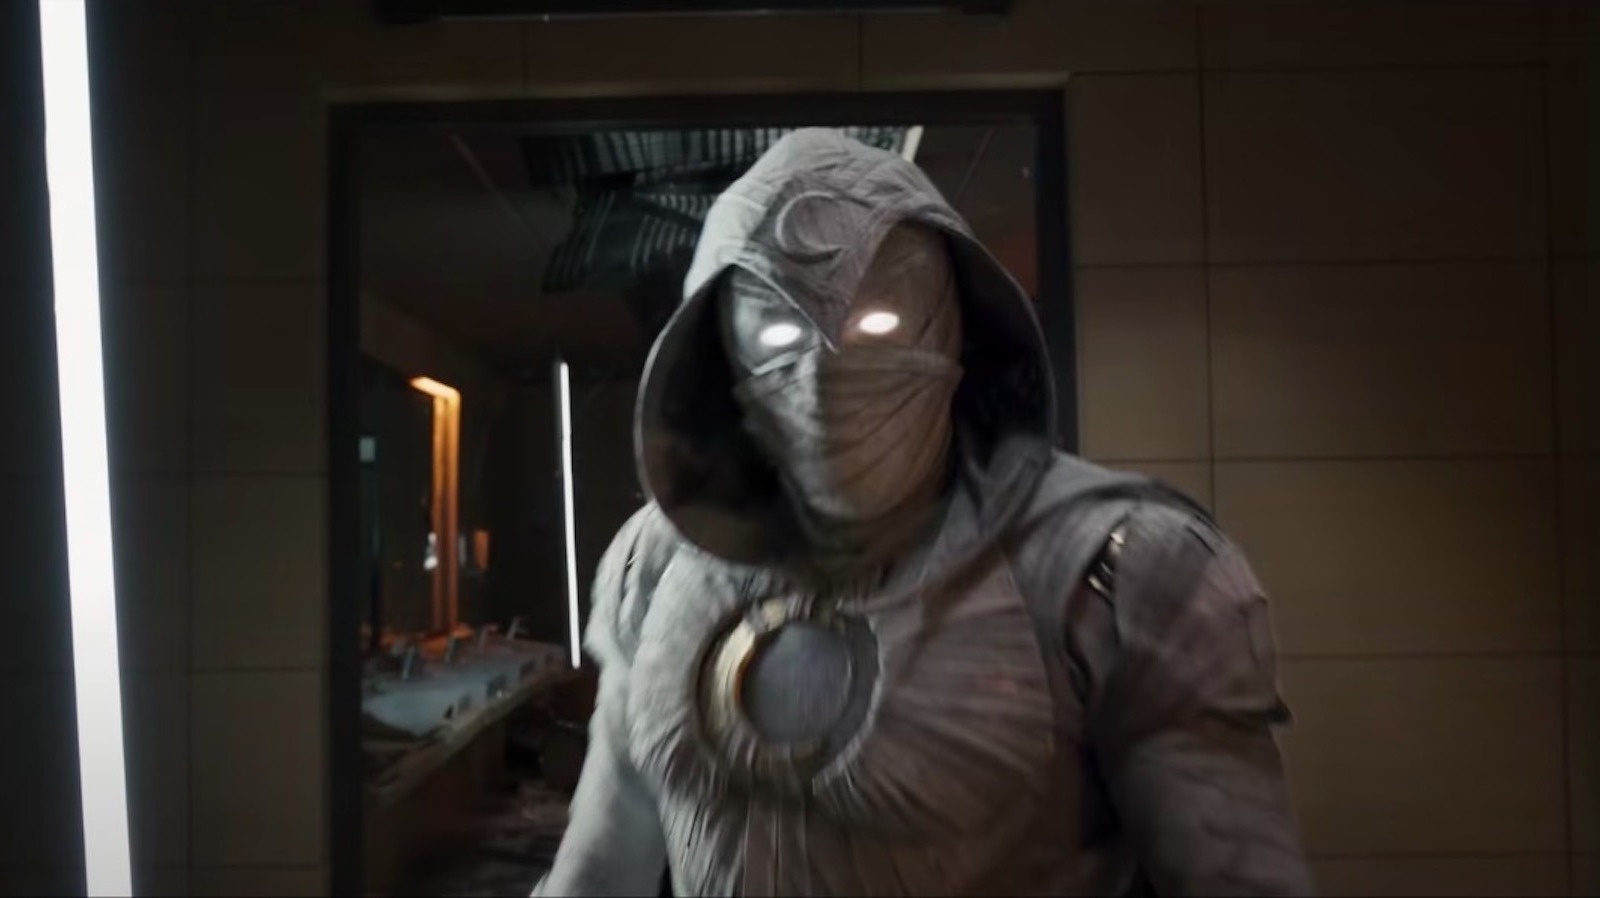 Moon Knight Trailer Breakdown: Time to Embrace the Chaos